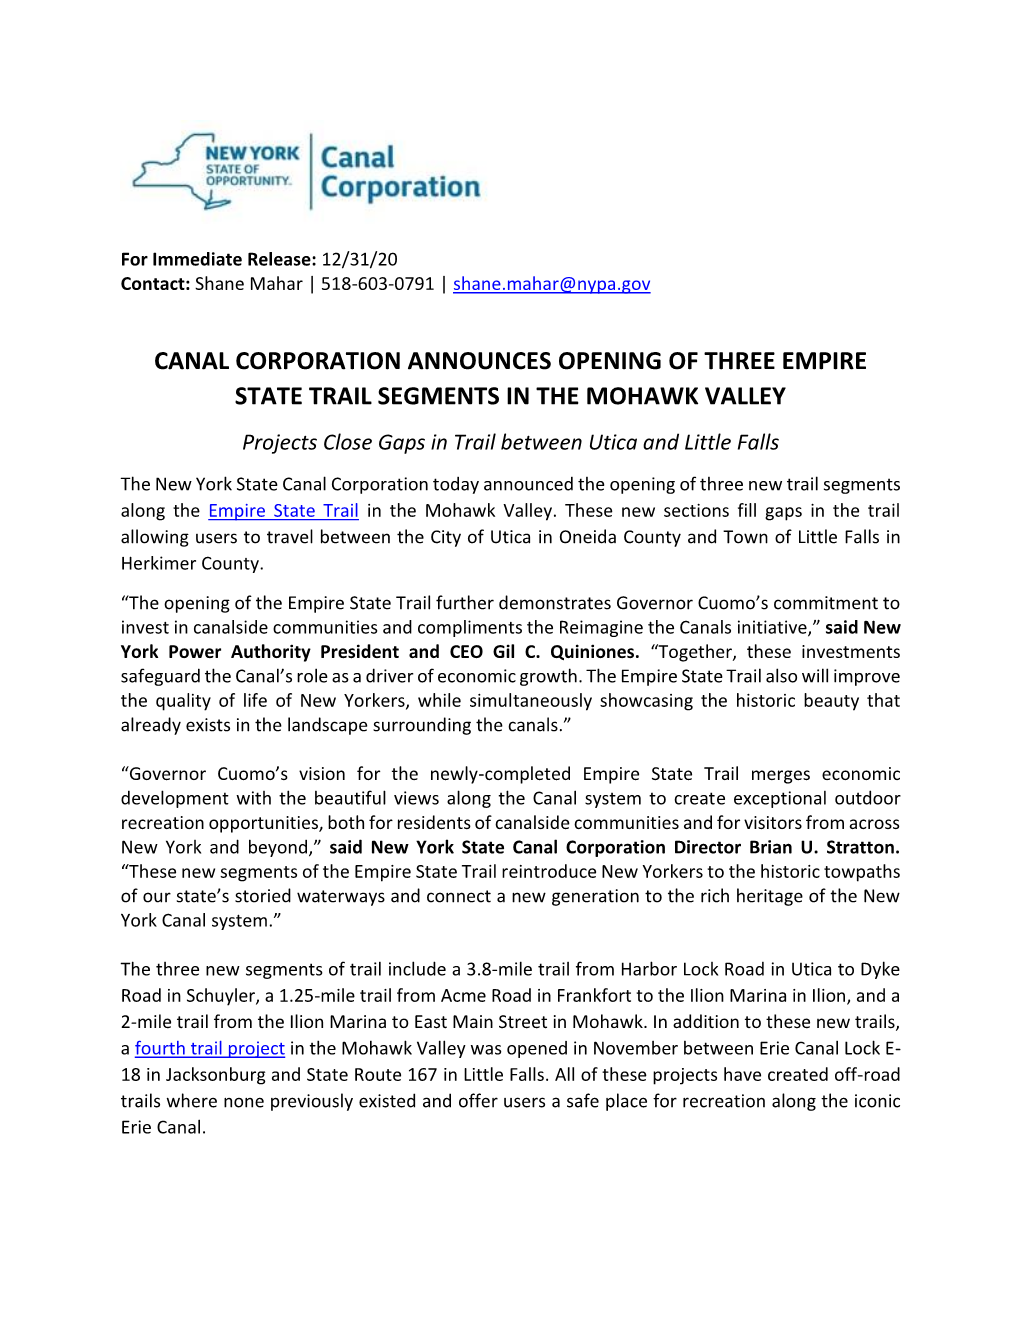 Canal Corporation Announces Opening of Three Empire State